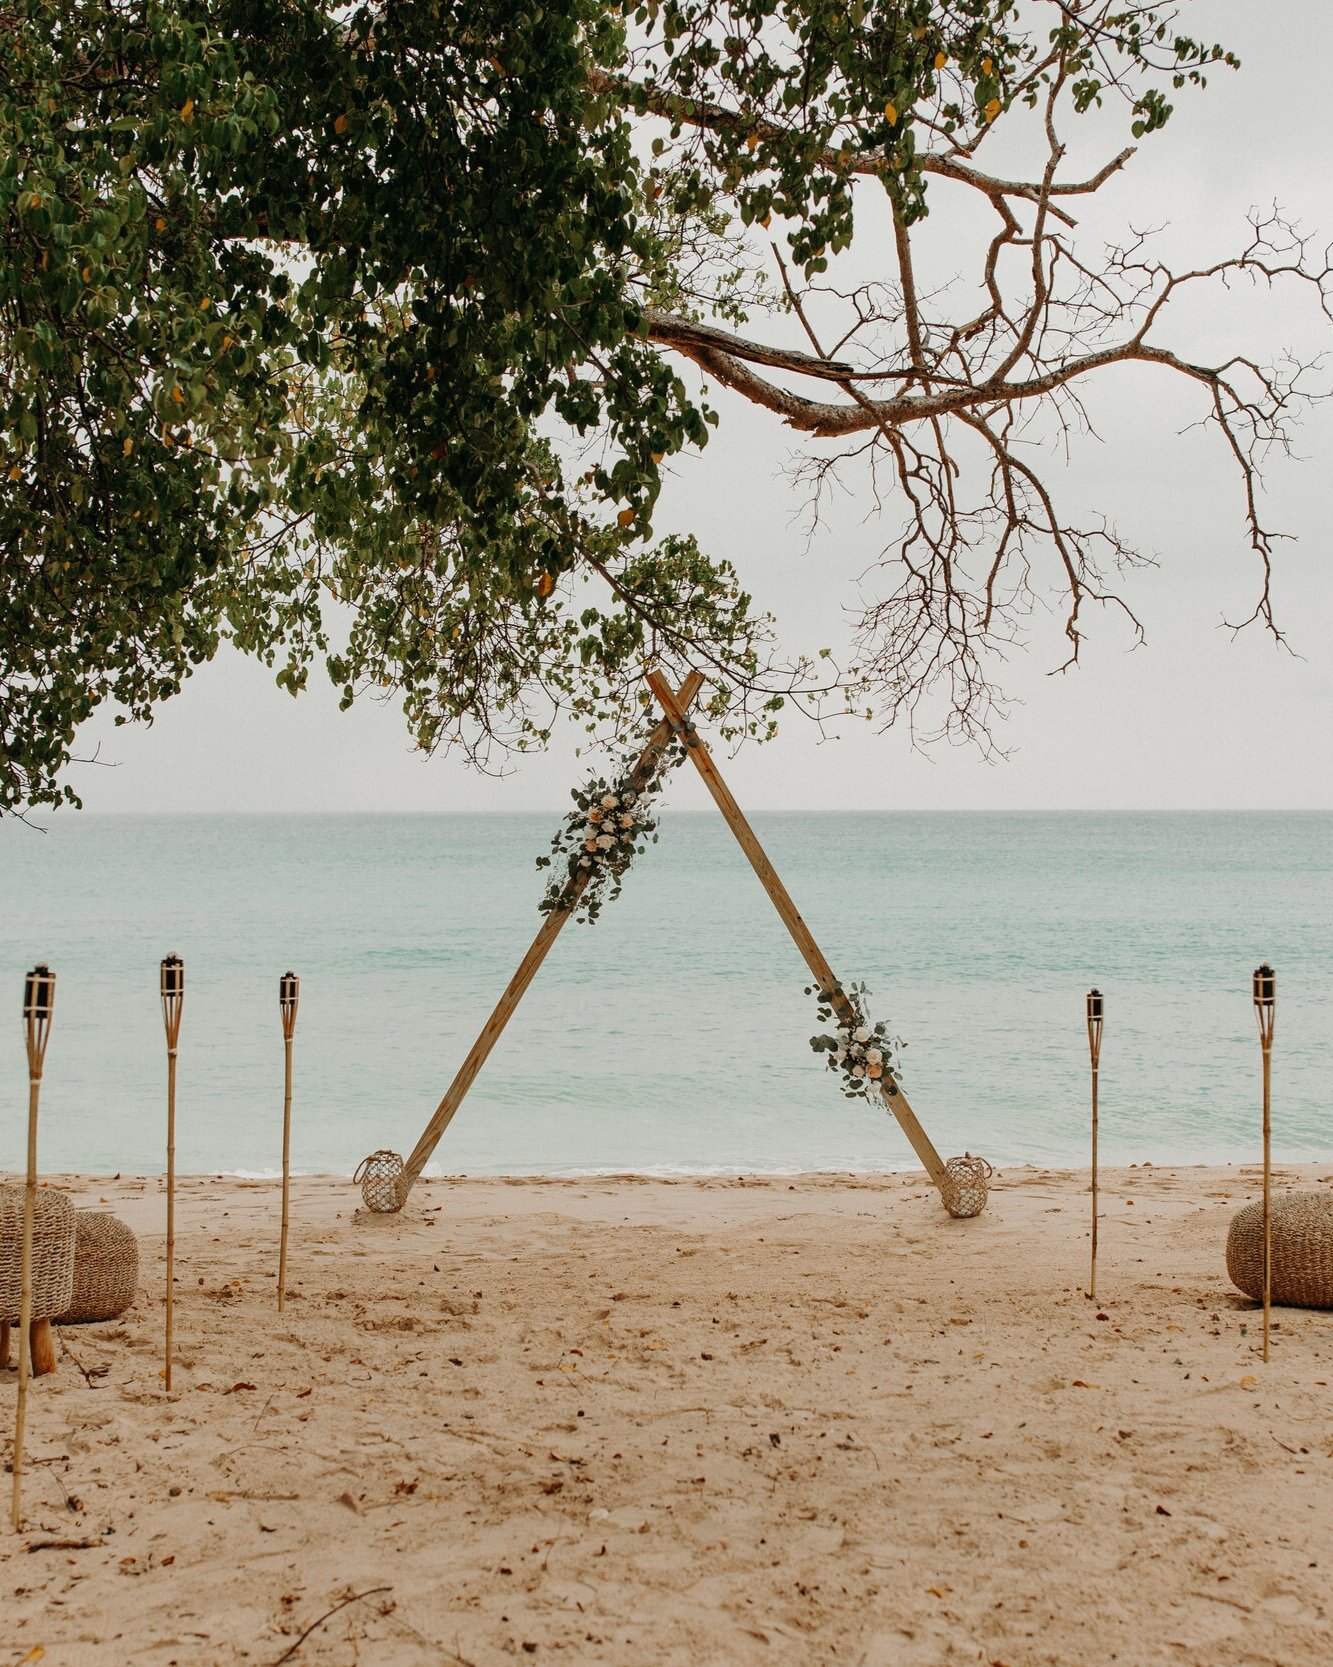 Sustainable wooden triangular arch sits on the beach for a boho wedding ceremony. The arch is accented with florals and tiki torches line the aisle. Behind the tiki torches are boho benches for guests to sit.